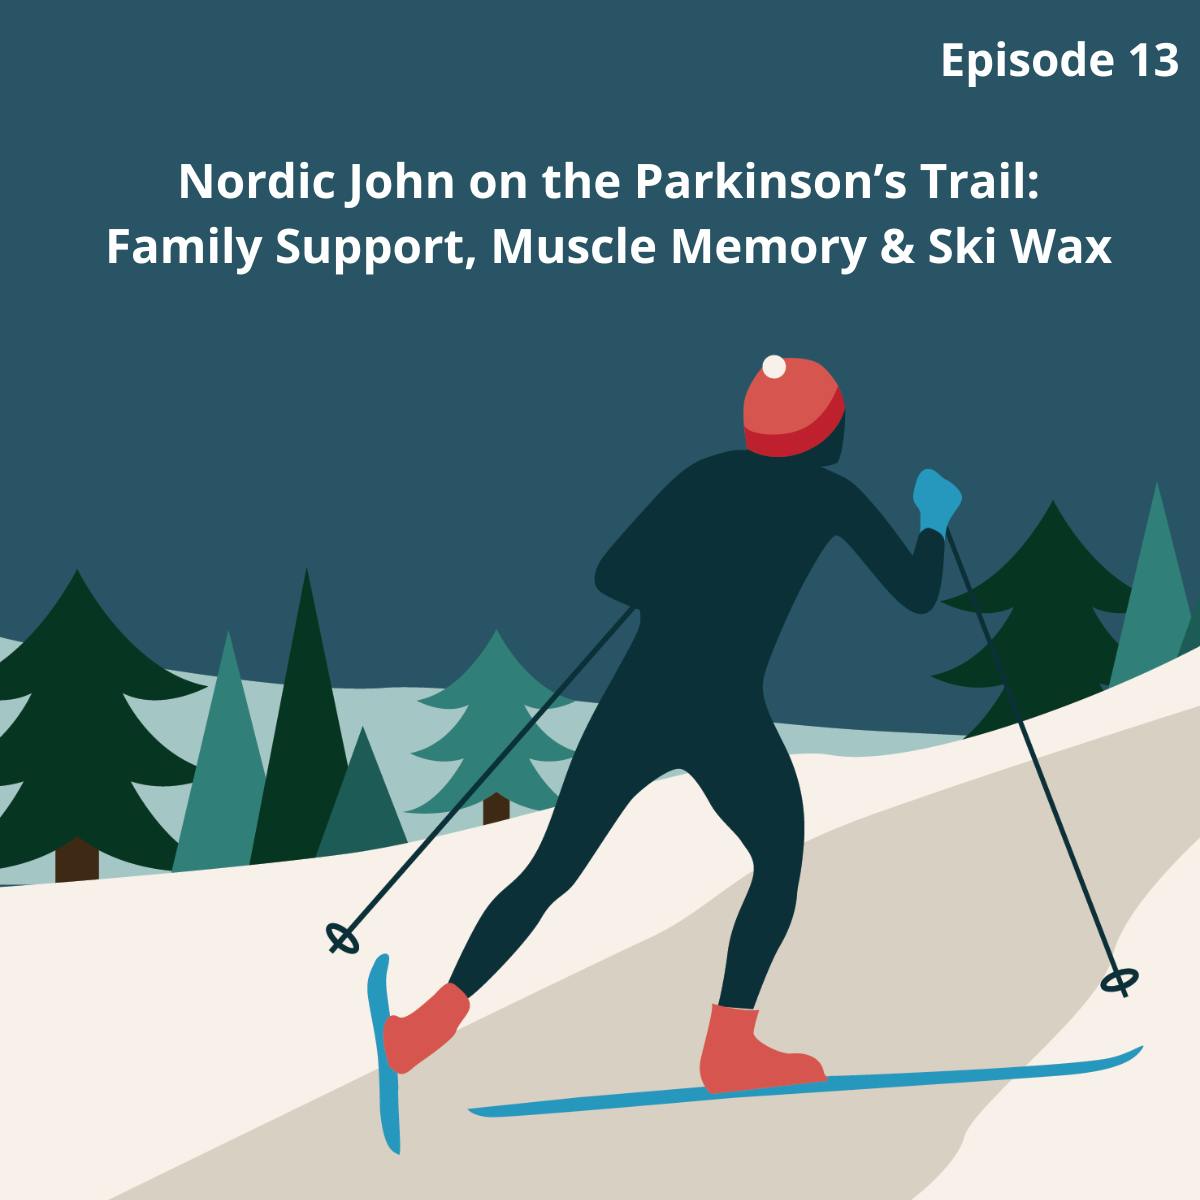 Nordic John on the Parkinson's Trail: Family Support, Muscle Memory & Ski Wax